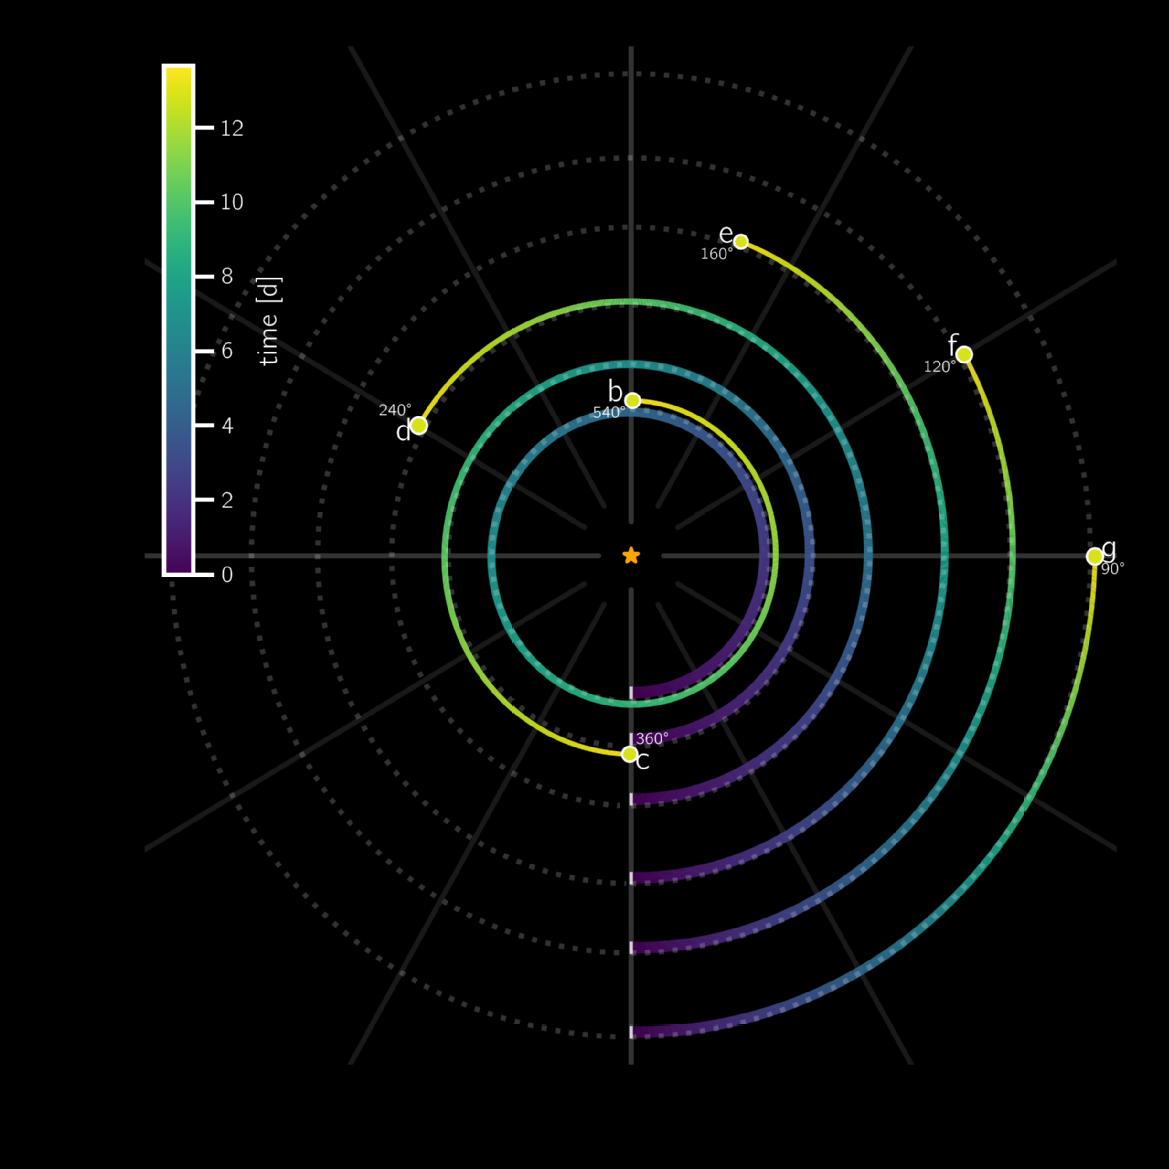 CAPTION: Orbital motion for all six planets relative to a single year of planet c. Due to the precise resonant orbits of all six planets, the orbits of each planet are closely linked. For every 360 degree rotation around HD110067 from planet c, planet b moves 540deg, planet d 240, planet e 160deg, planet f 120deg and planet g 90 degrees.